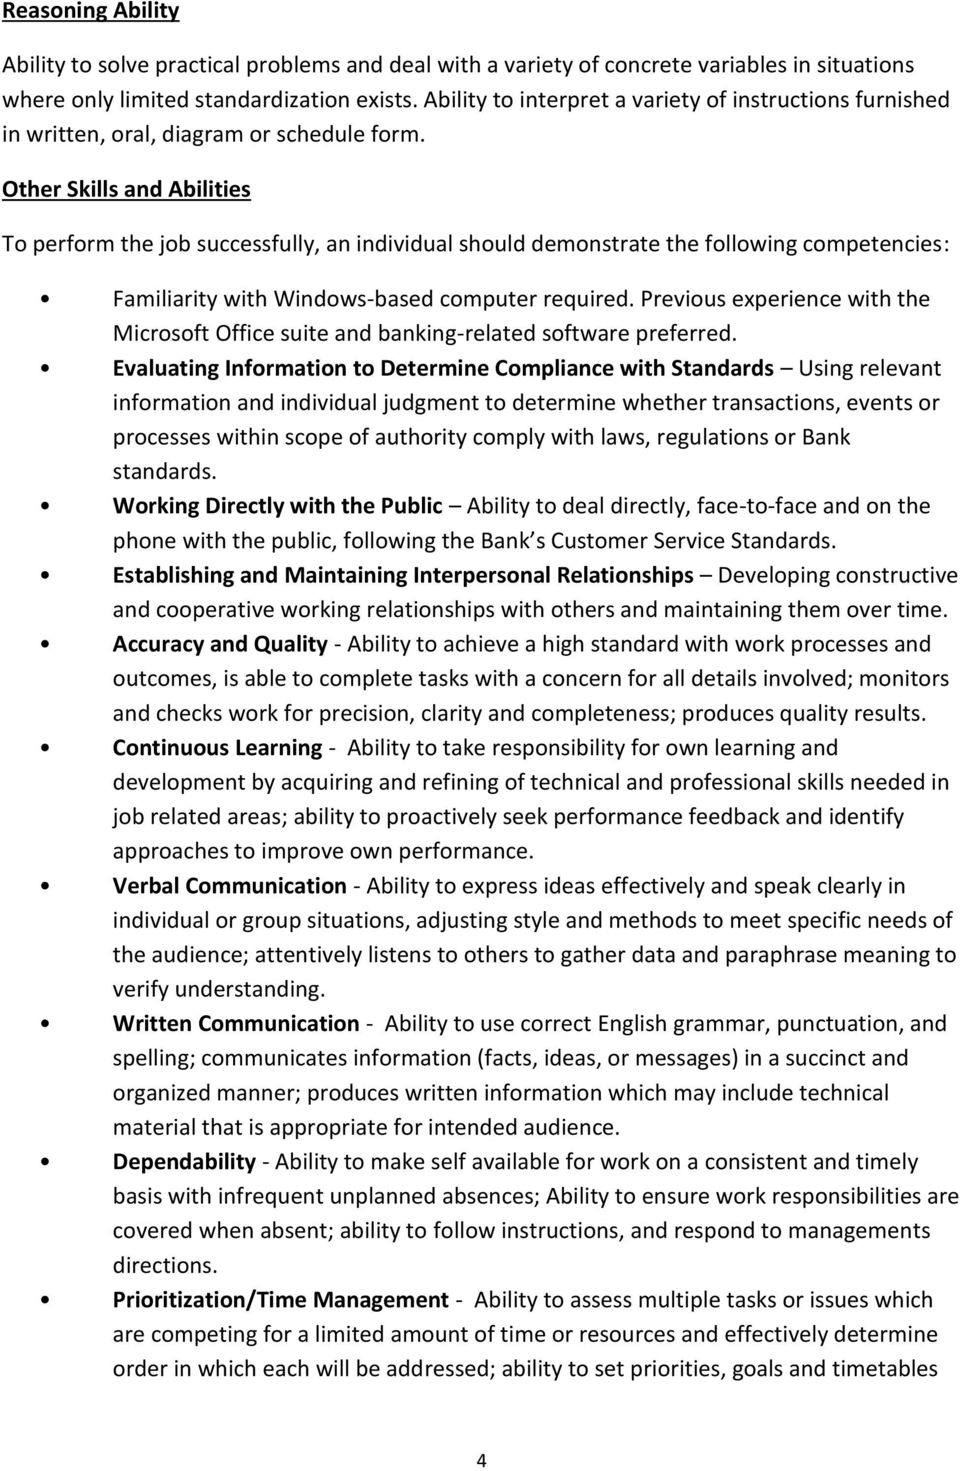 Other Skills and Abilities To perform the job successfully, an individual should demonstrate the following competencies: Familiarity with Windows-based computer required.